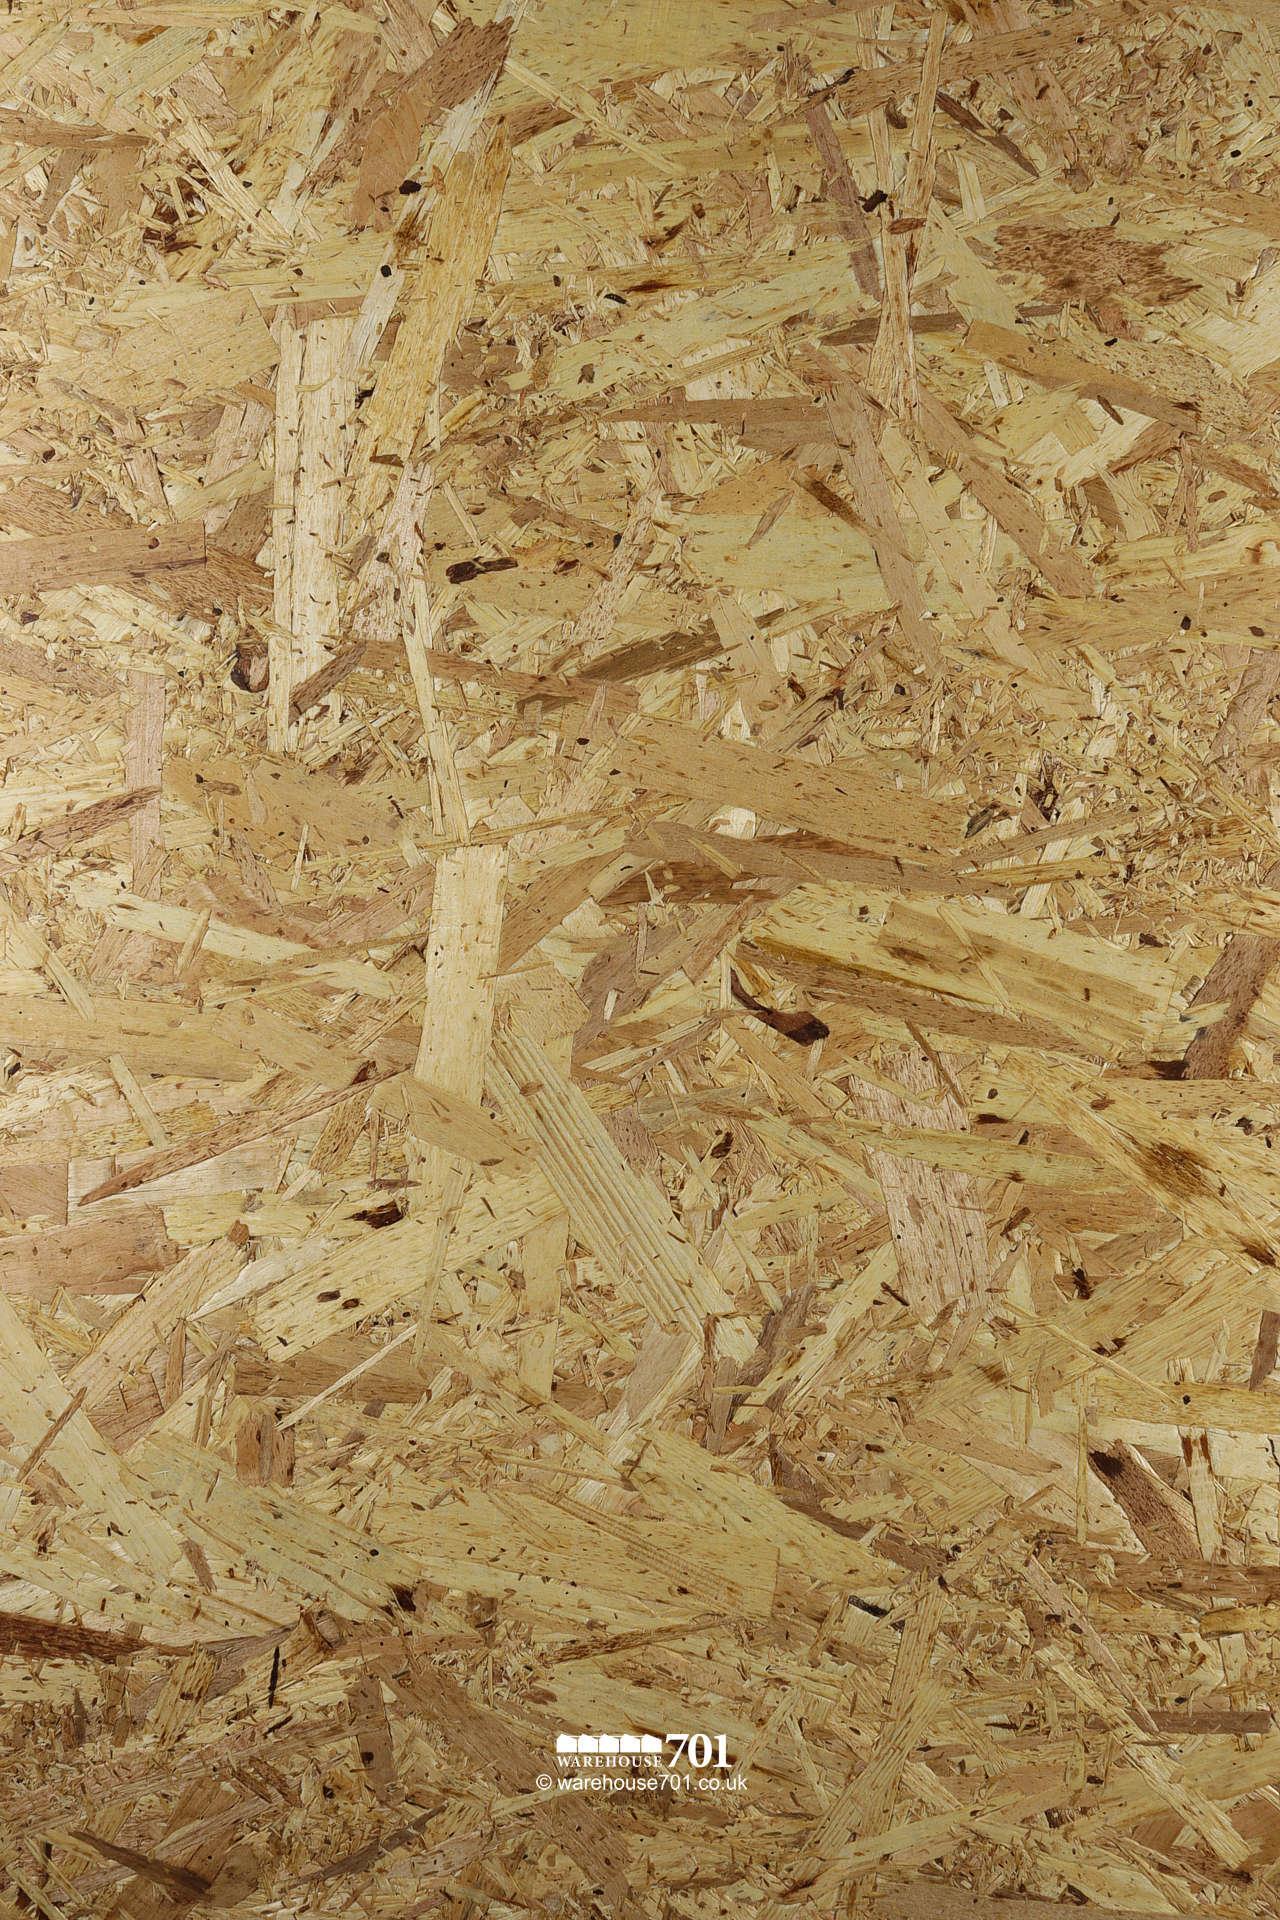 NEW Kronospan® OSB3 (Oriented Strand Board) or Sterling board for construction and DIY #4